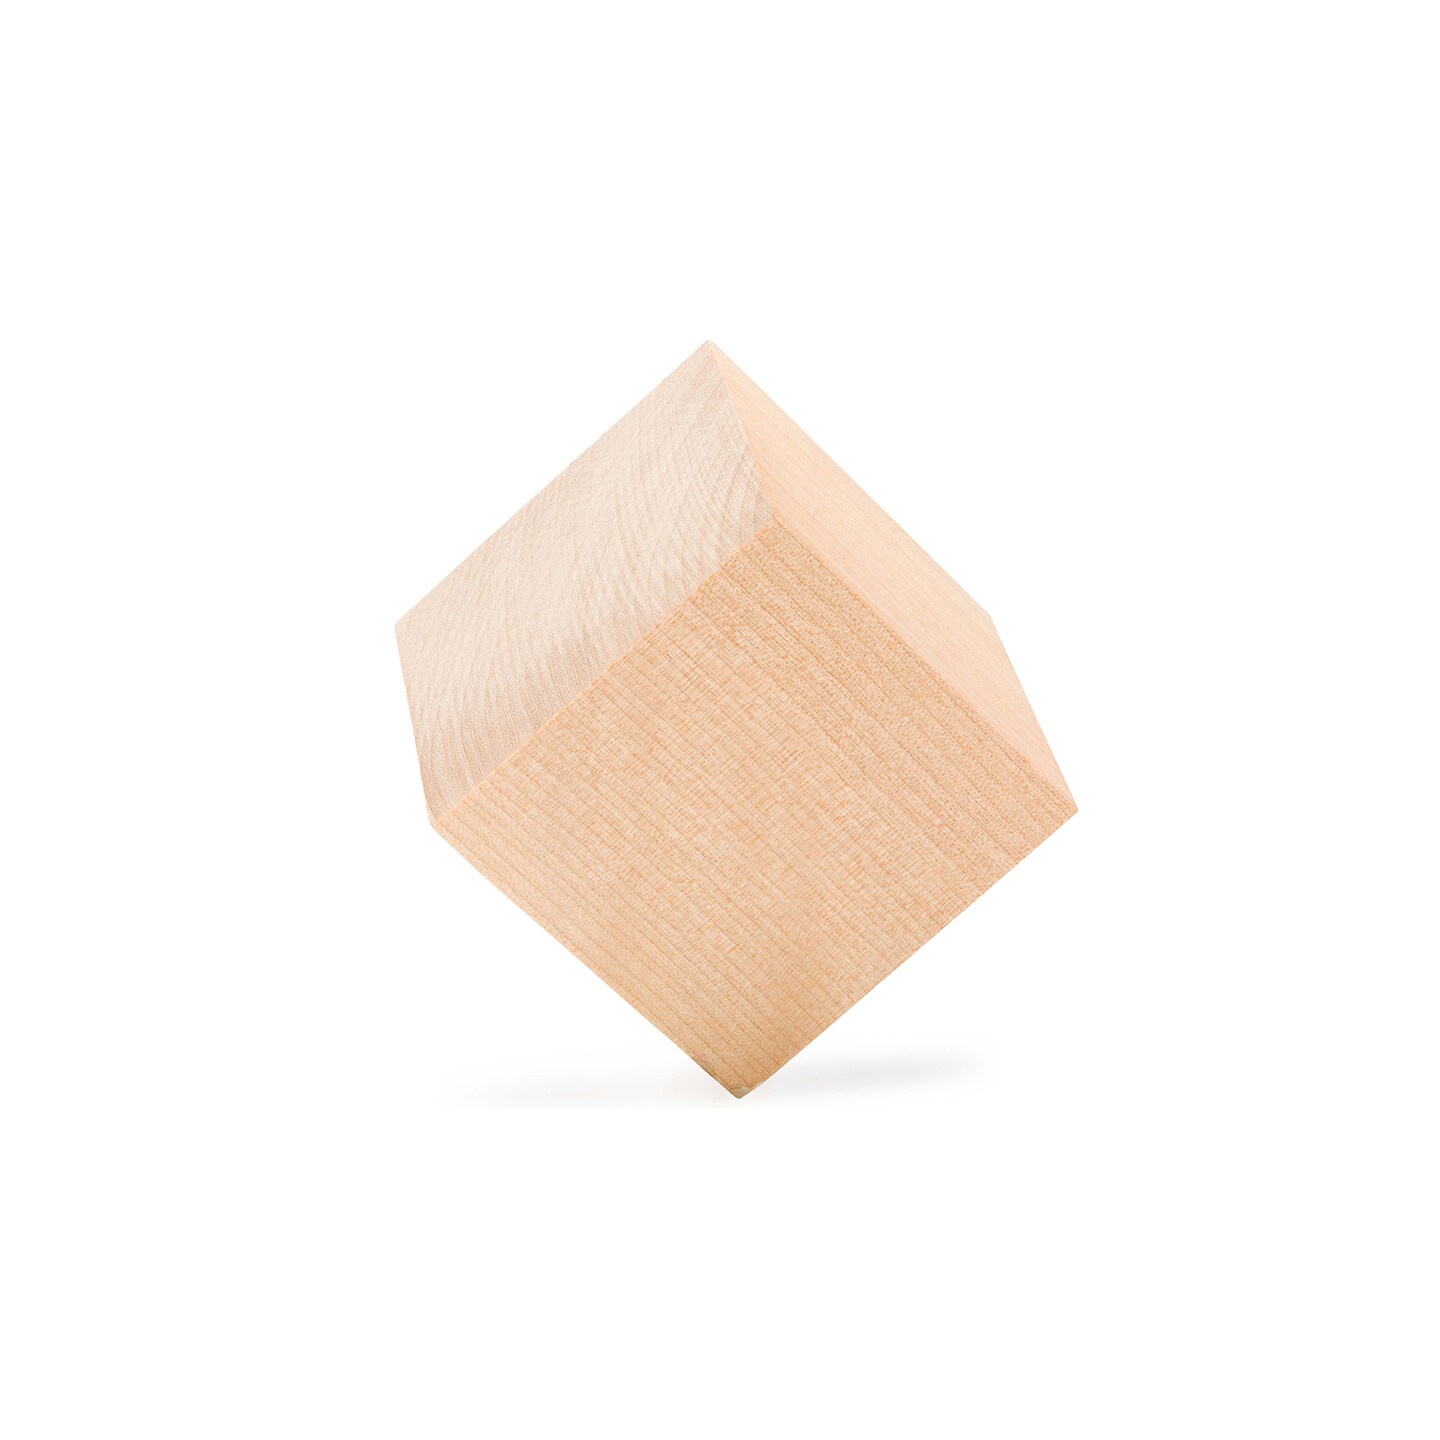 Wood Craft Cubes, Multiple Sizes Available, Small Blocks, Crafts & Dcor, Woodpeckers